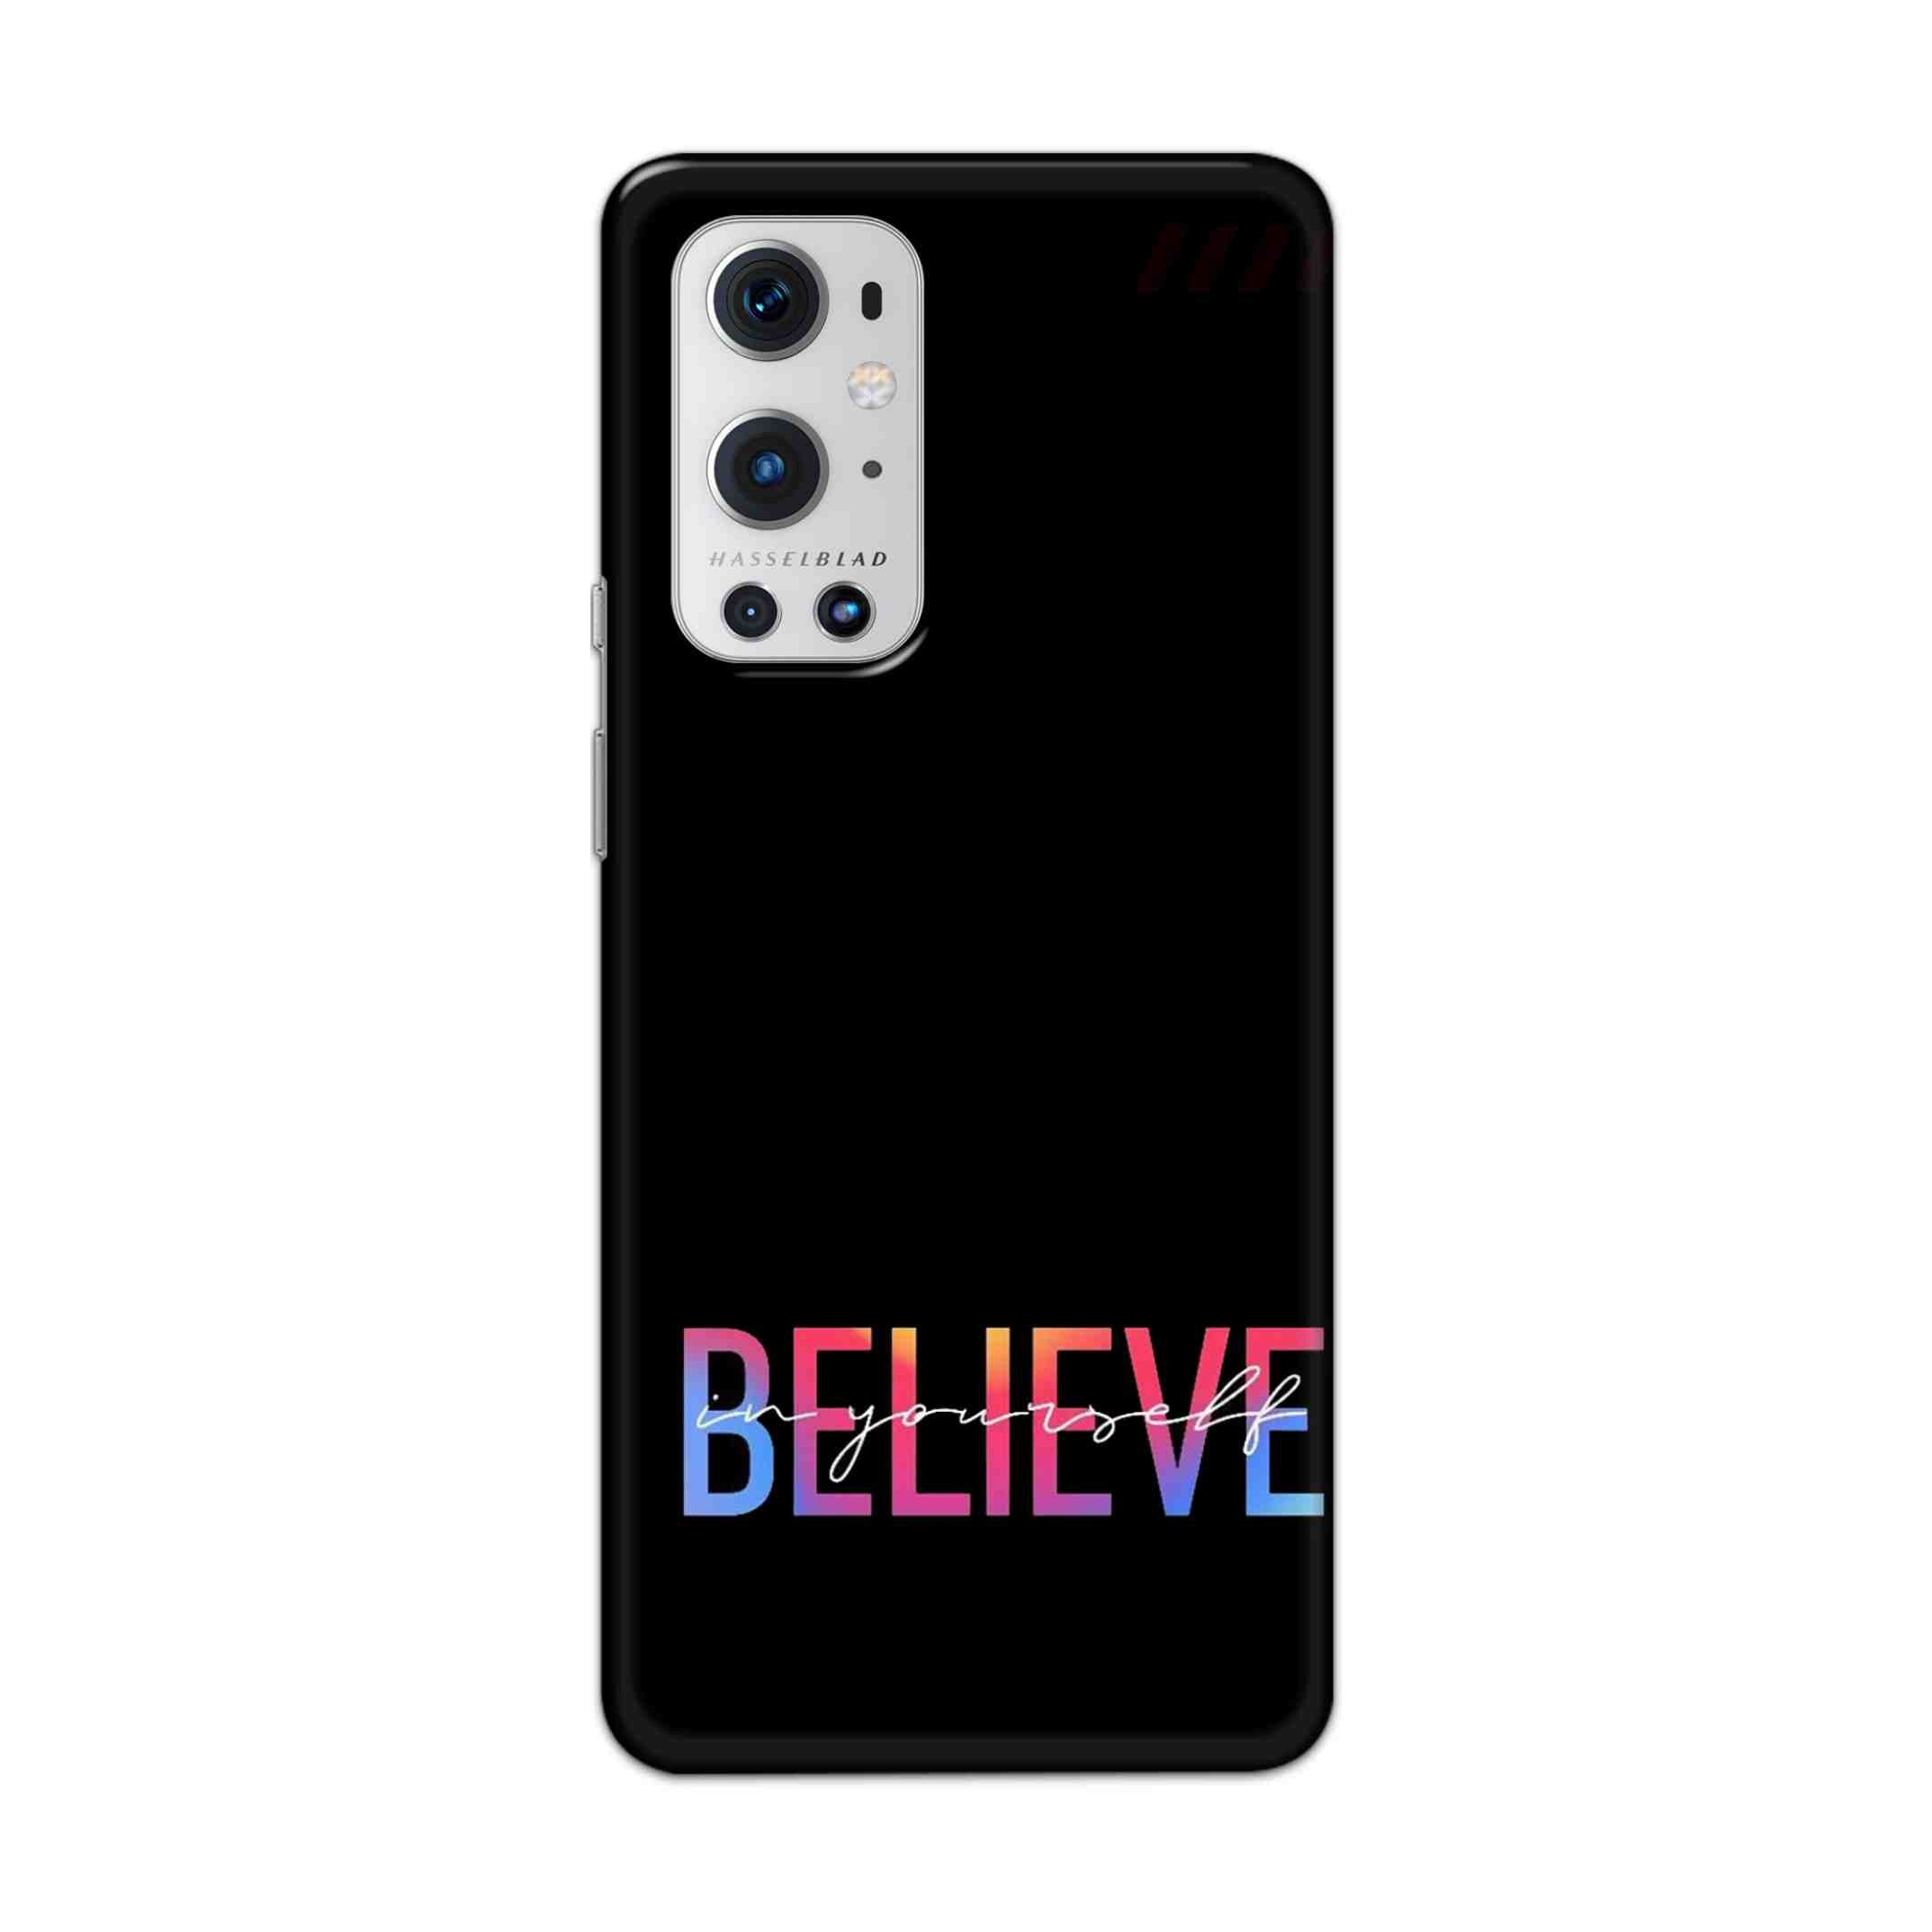 Buy Believe Hard Back Mobile Phone Case Cover For OnePlus 9 Pro Online